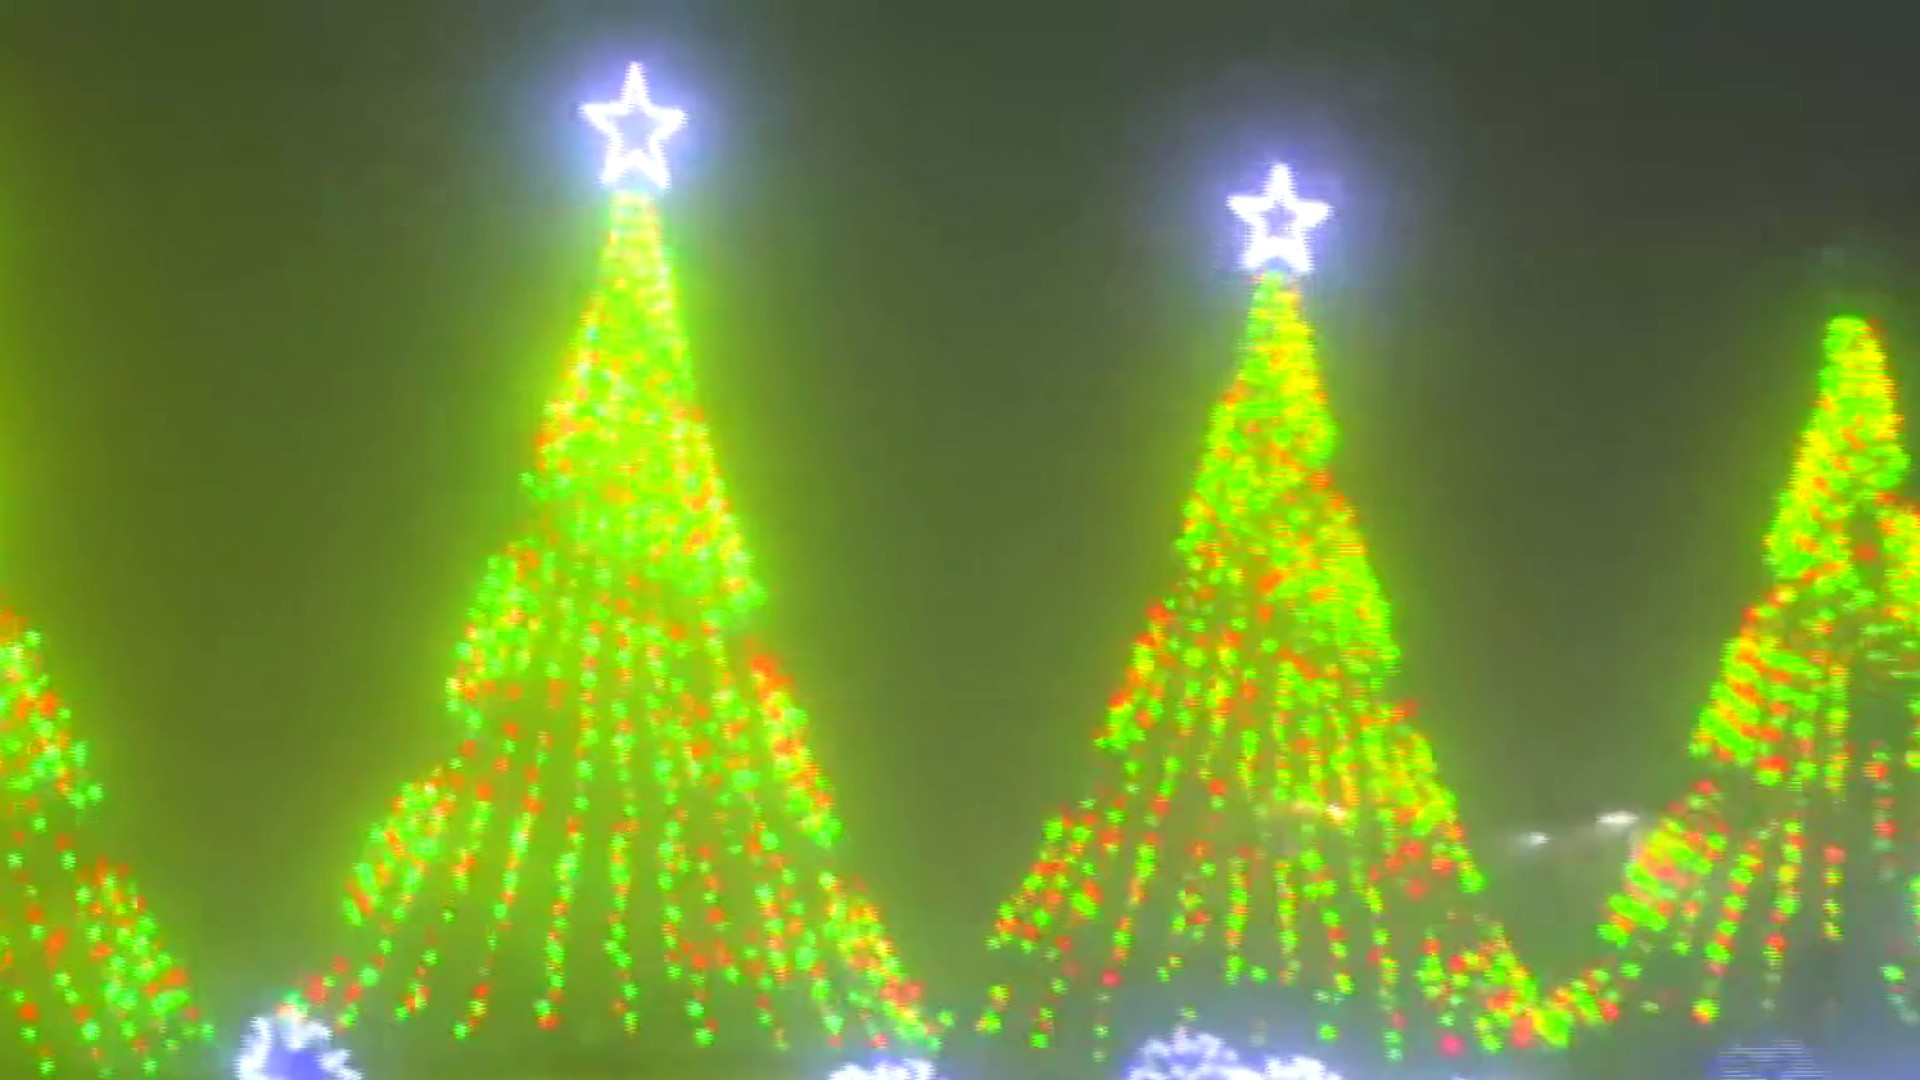 Experience the wonder of over Christmas lights Felts Park in Galax